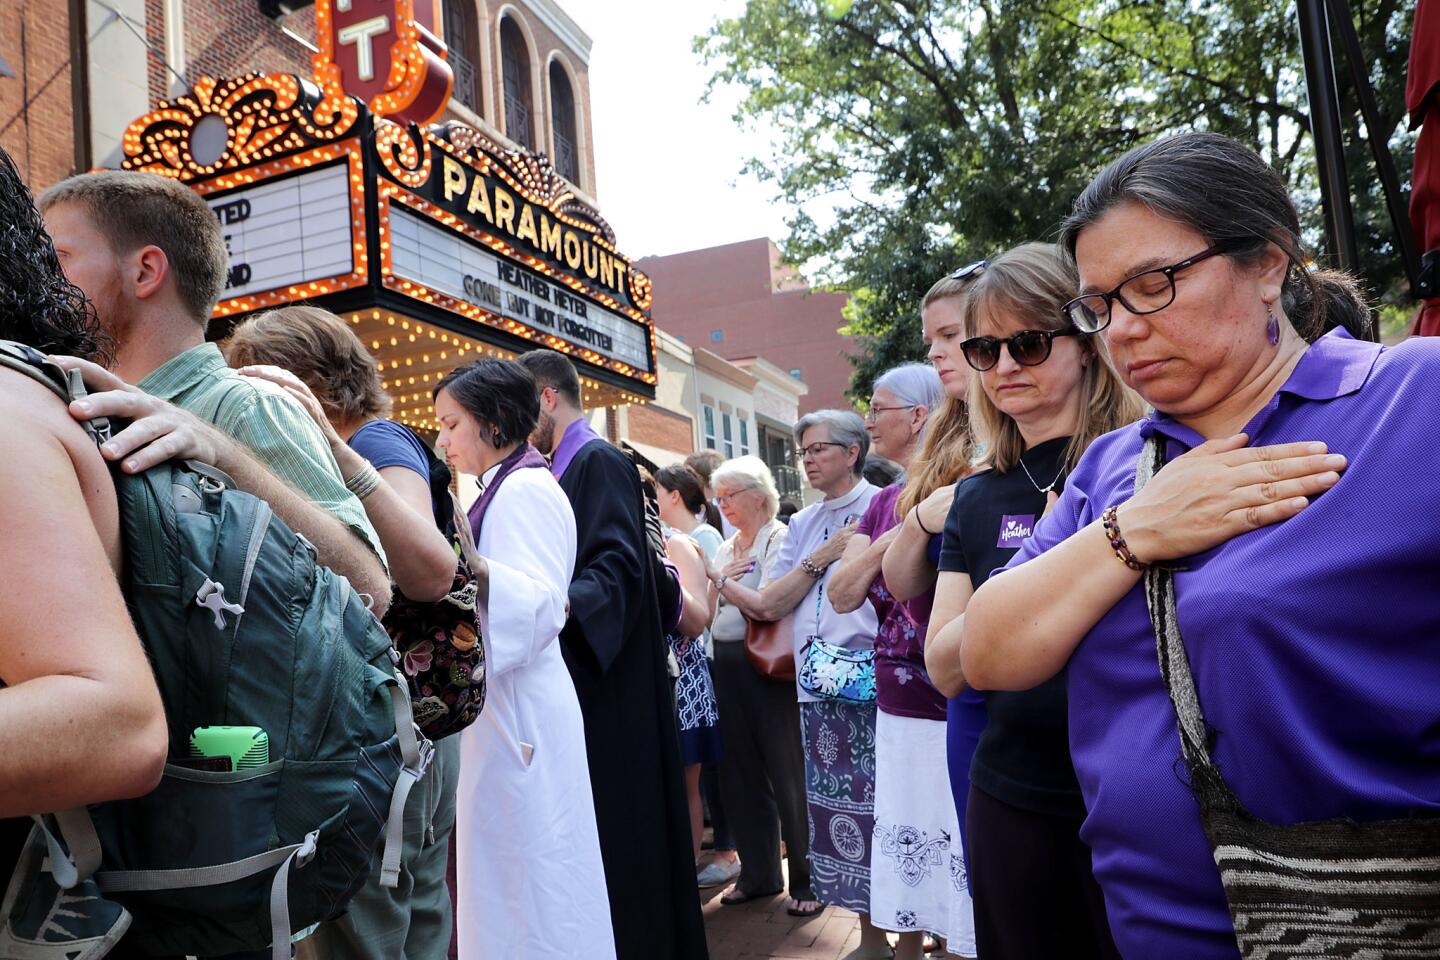 Clergy observe a moment of silence during the memorial service for Heather Heyer outside the Paramount Theater August 16, 2017 in Charlottesville, Virginia. The memorial service was held four days after Heyer was killed when a participant in a white nationalist, neo-Nazi rally allegedly drove his car into the crowd of people demonstrating against the 'alt-right' gathering.